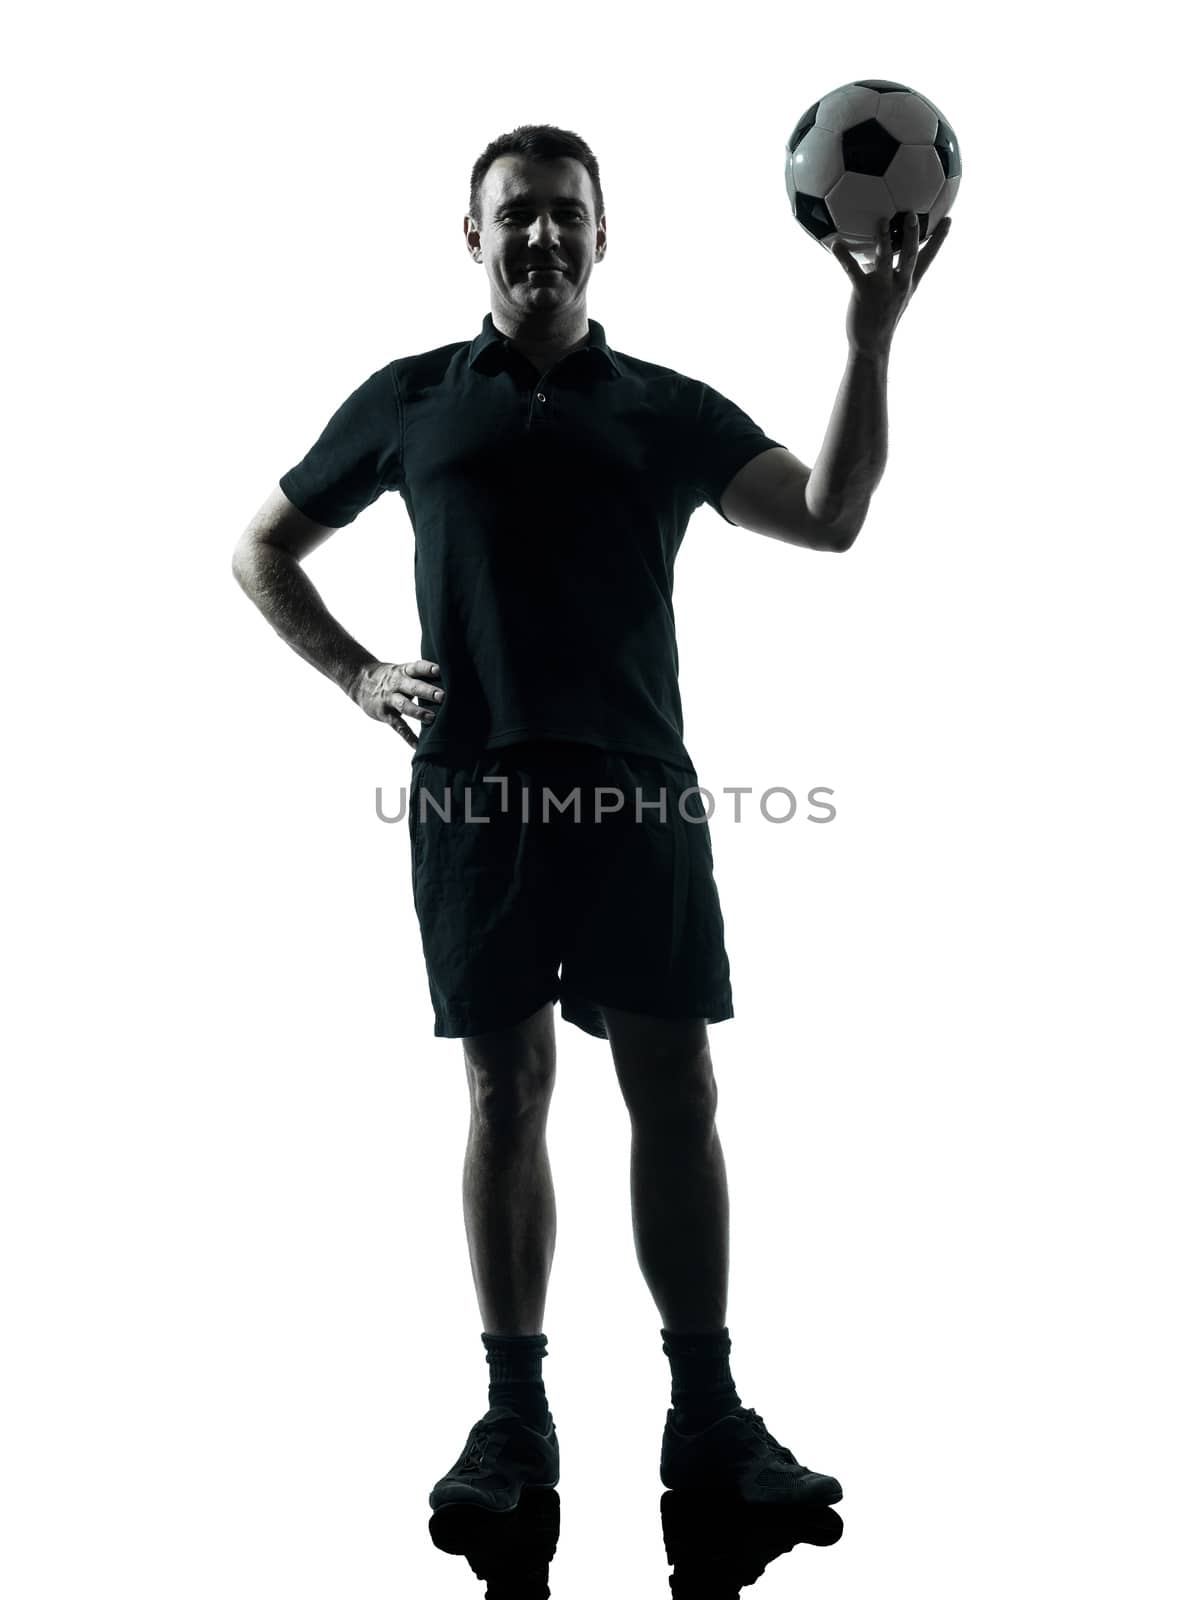 one man soccer player holding ball in studio silhouette isolated on white background